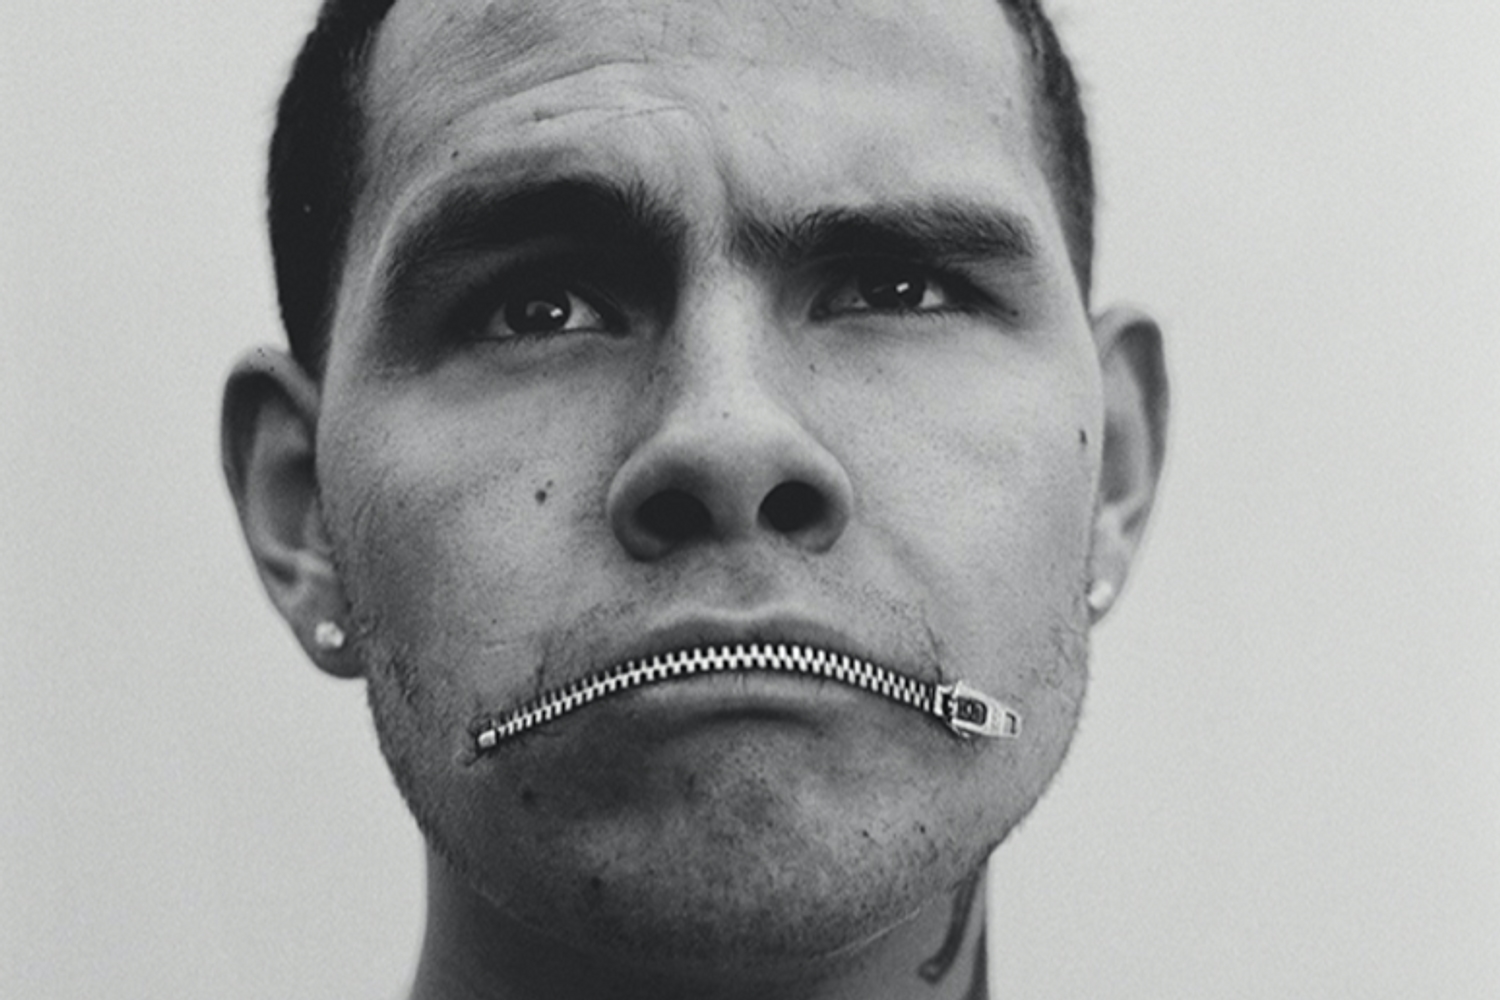 slowthai teams up with A$AP Rocky for new track ‘MAZZA’